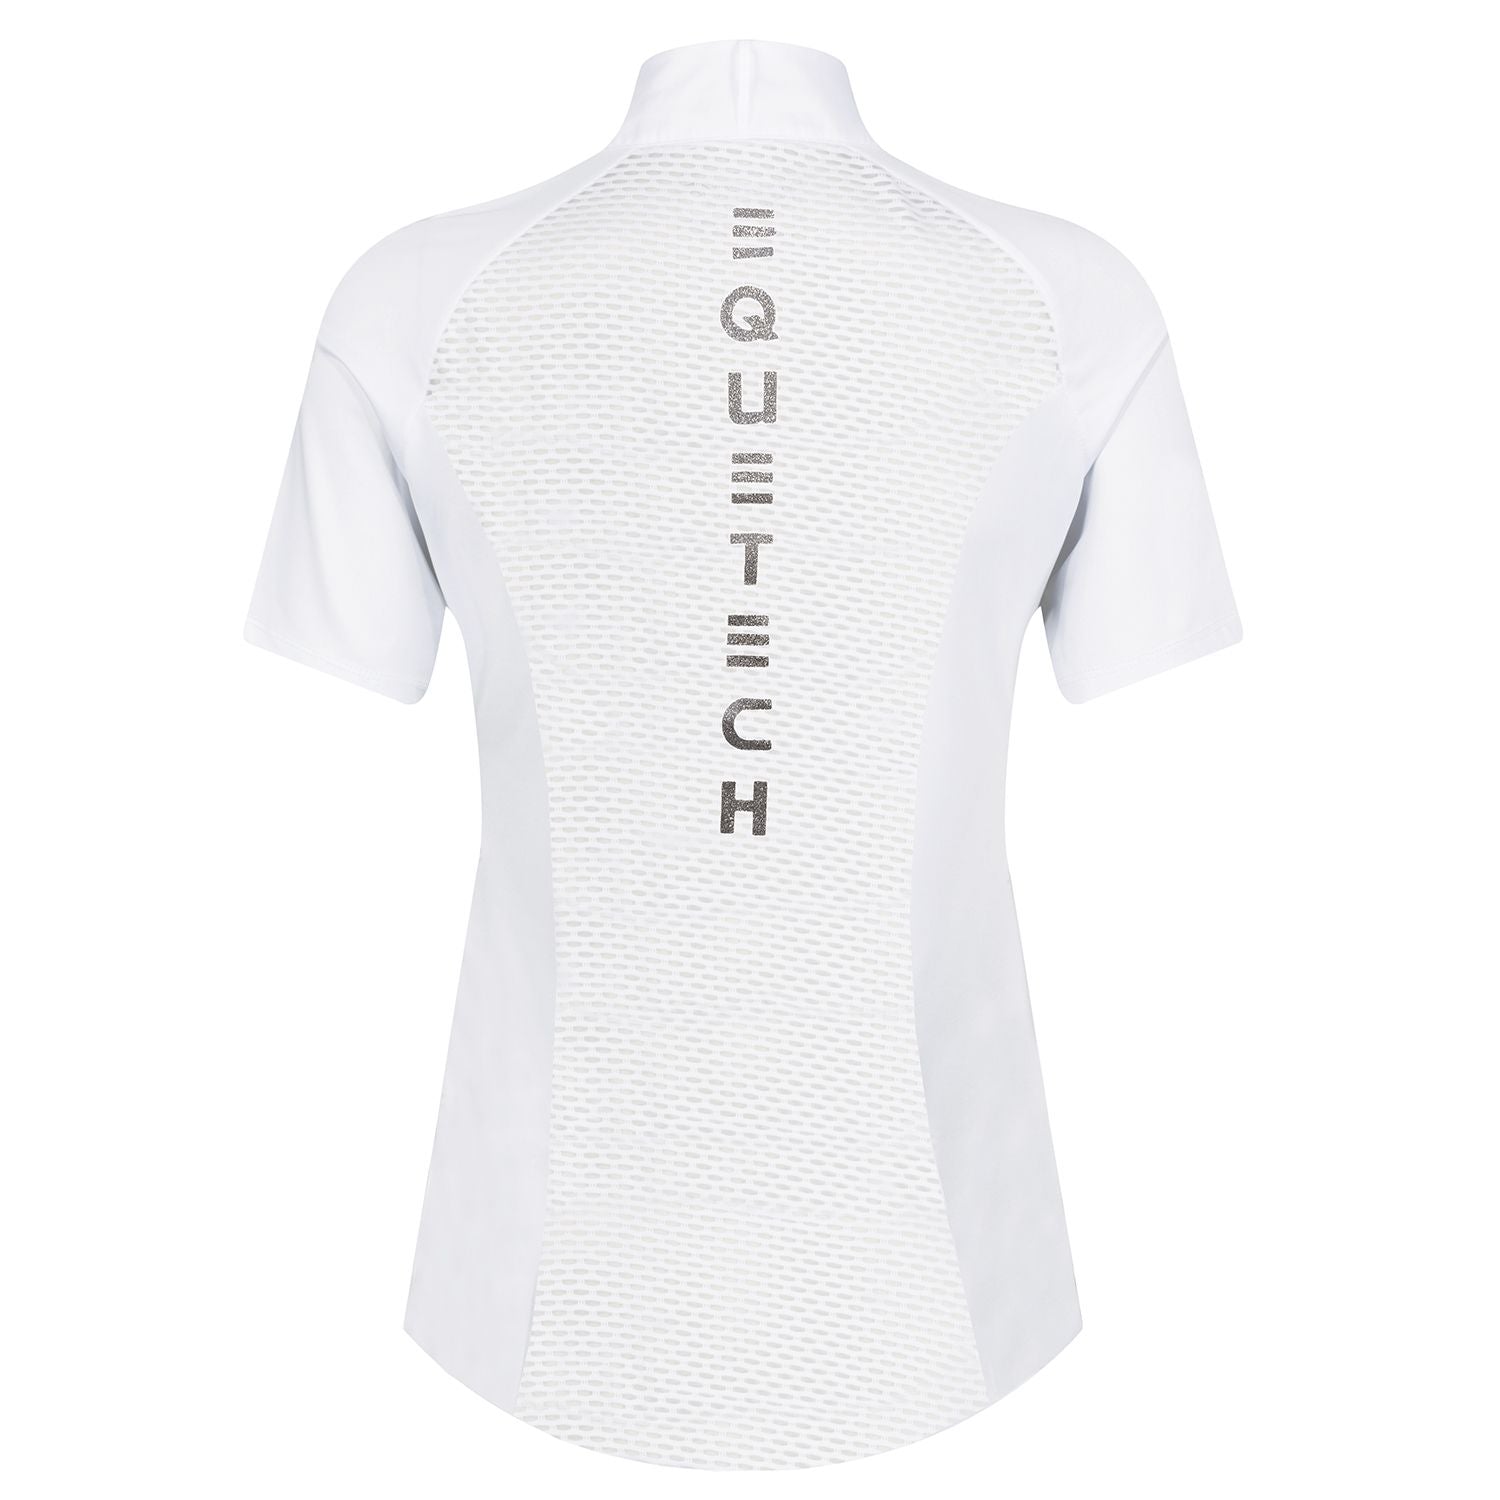 Equetech Signature Cool Competition Shirt White